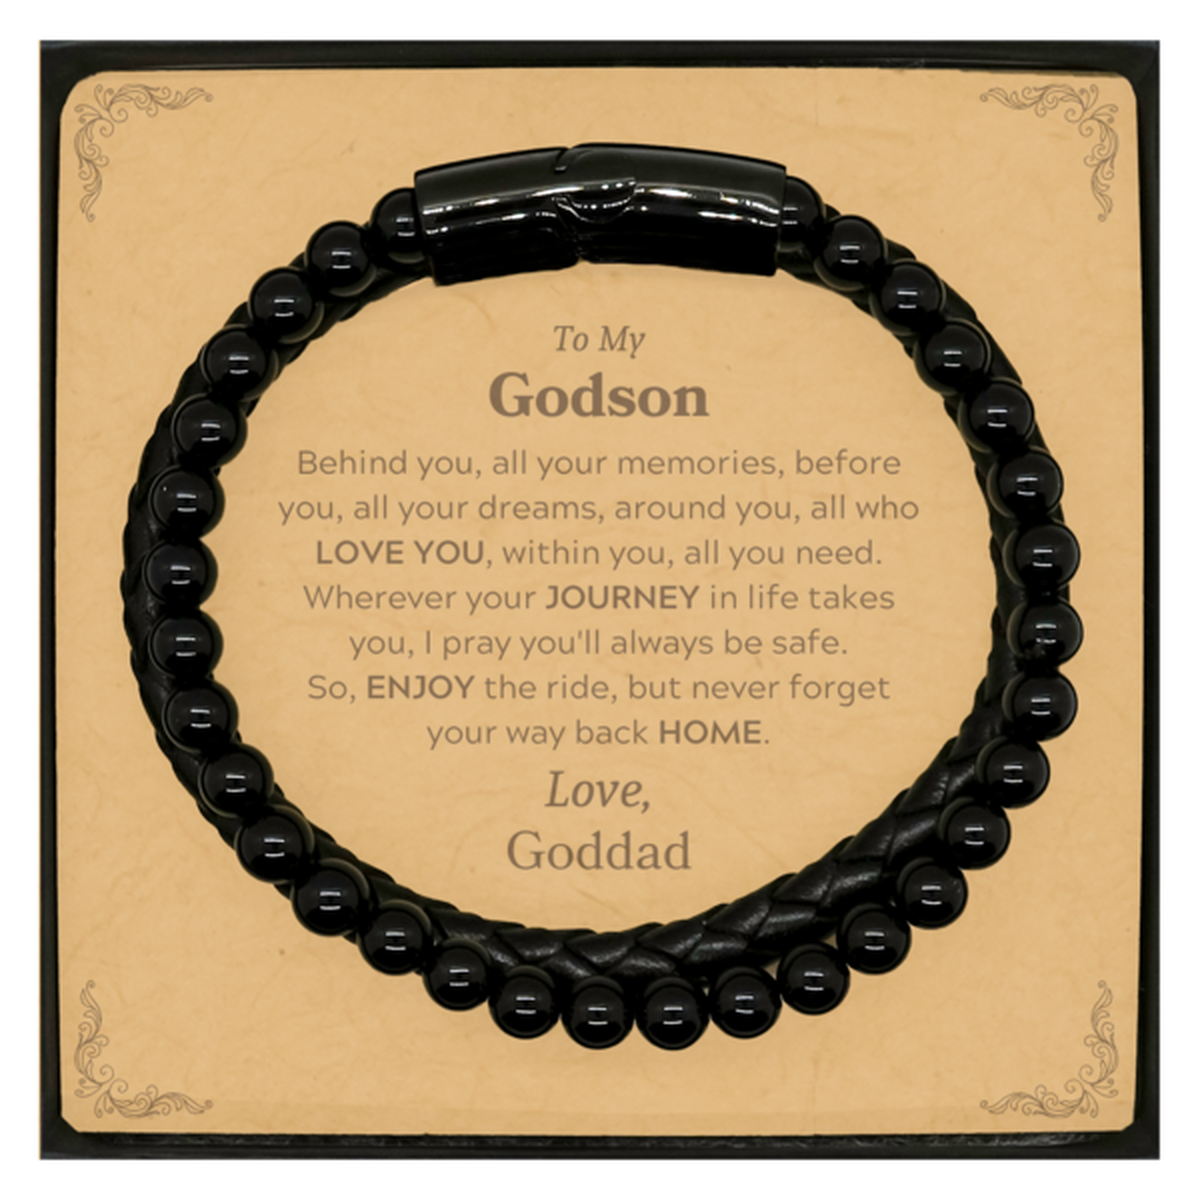 To My Godson Graduation Gifts from Goddad, Godson Stone Leather Bracelets Christmas Birthday Gifts for Godson Behind you, all your memories, before you, all your dreams. Love, Goddad